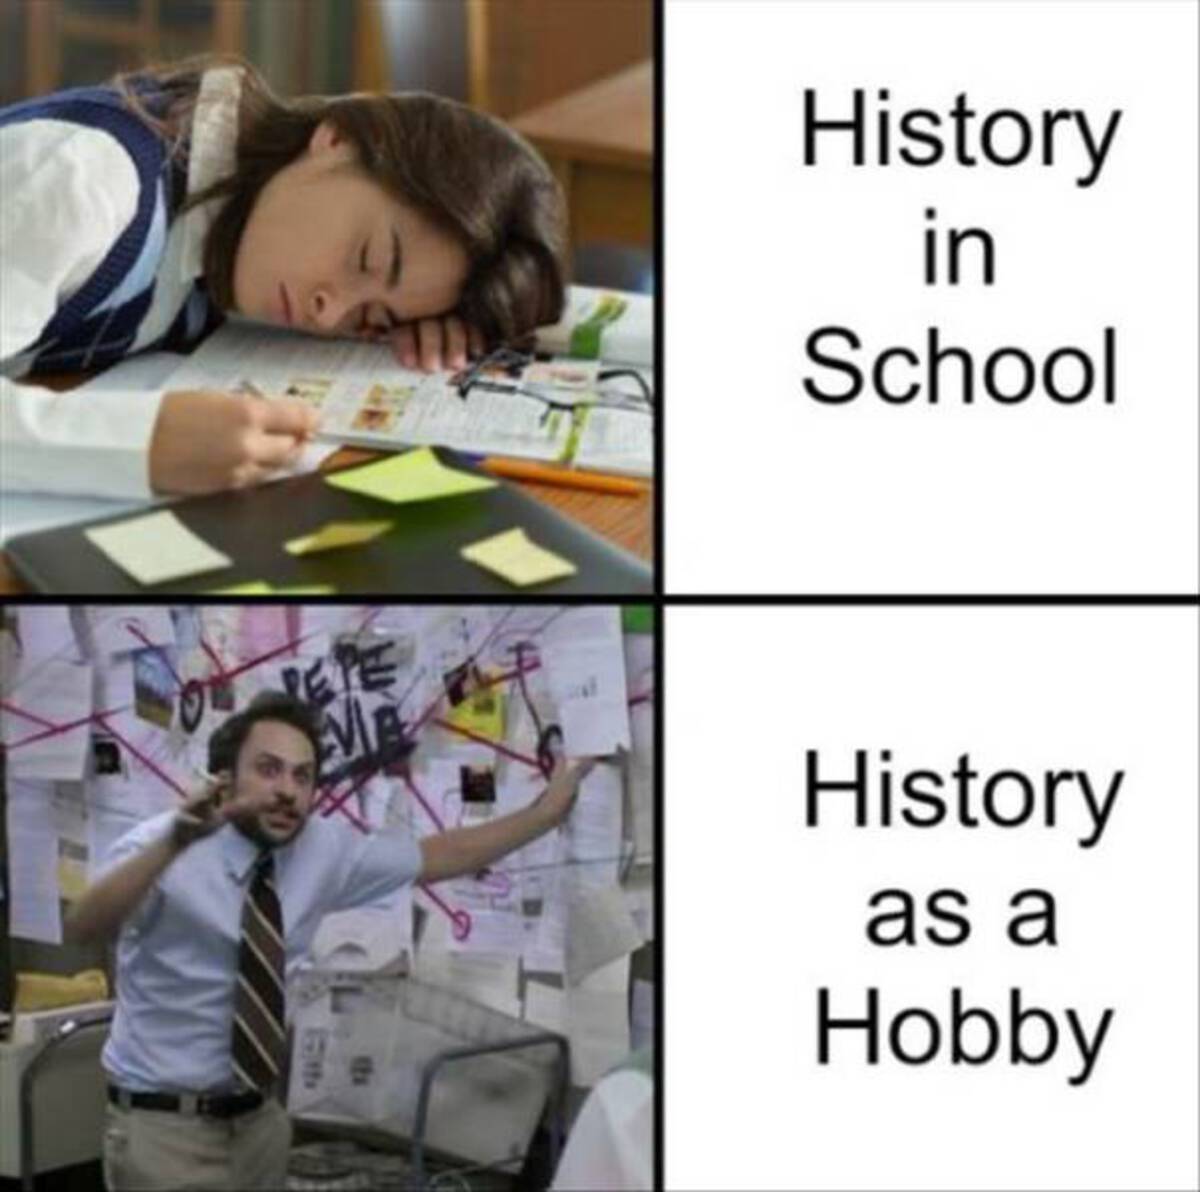 learning - 1504 History in School History as a Hobby